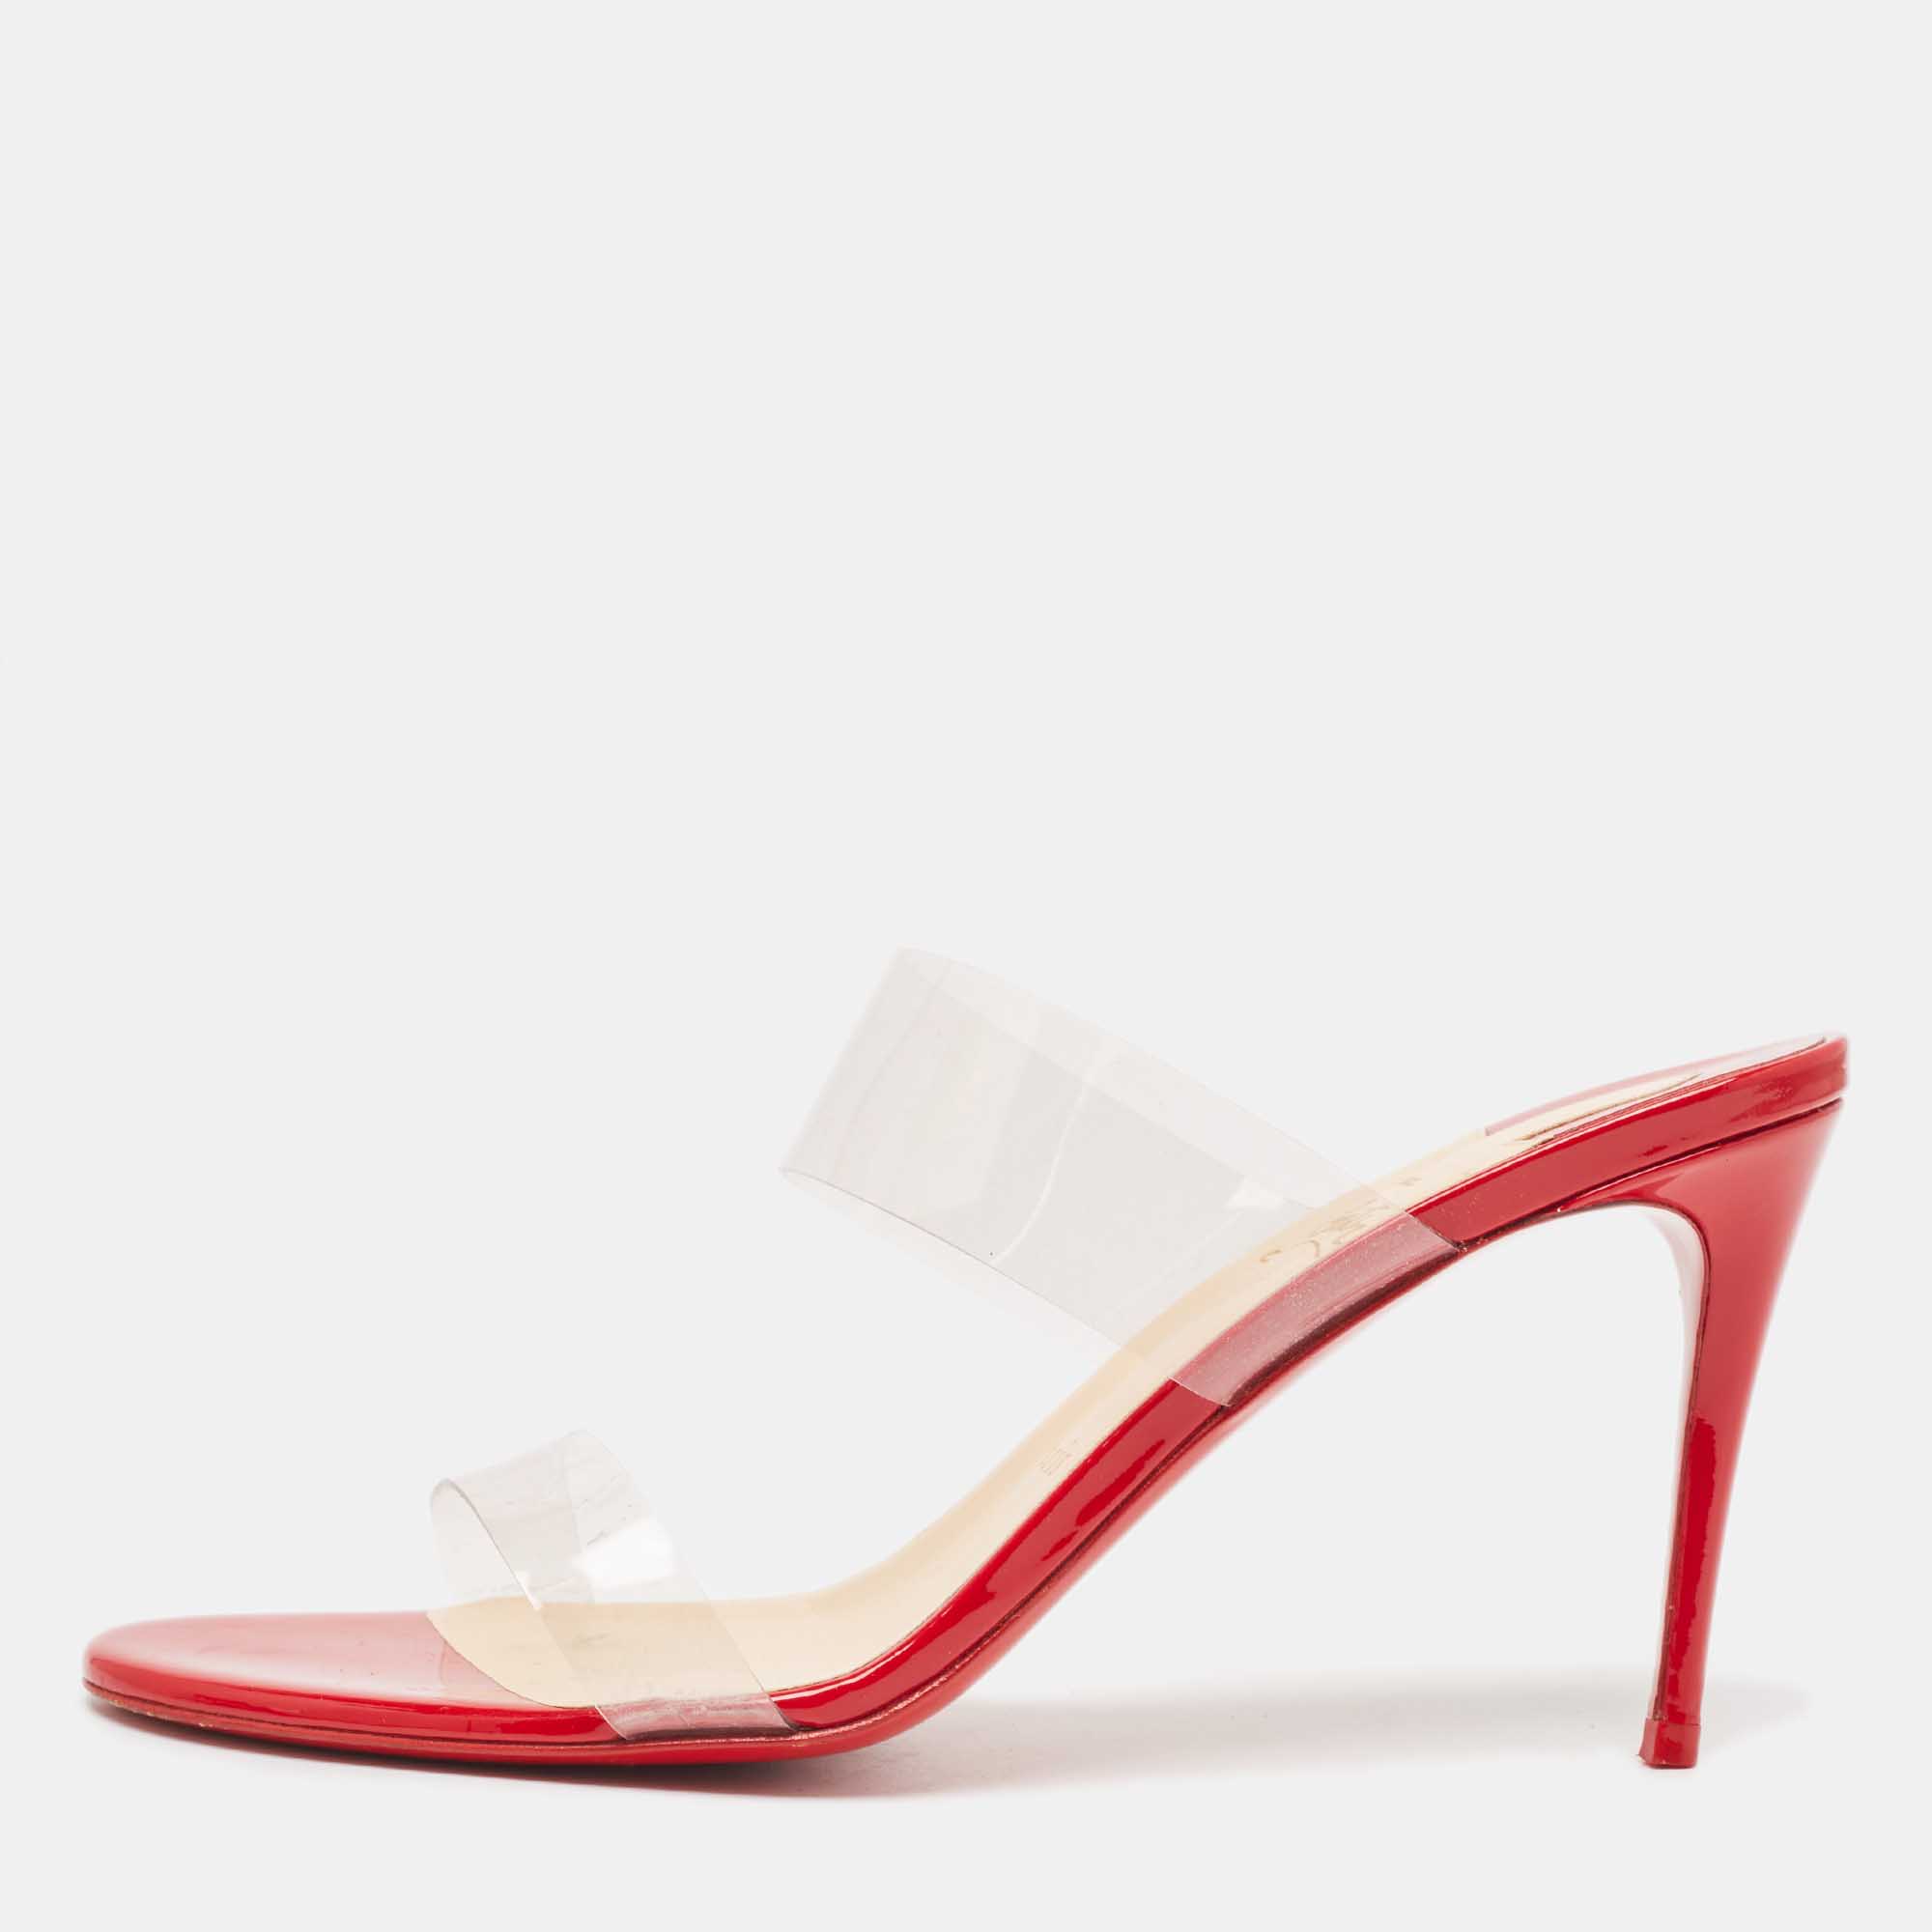 Pre-owned Christian Louboutin Transparent Pvc Just Nothing Slide Sandals Size 38.5